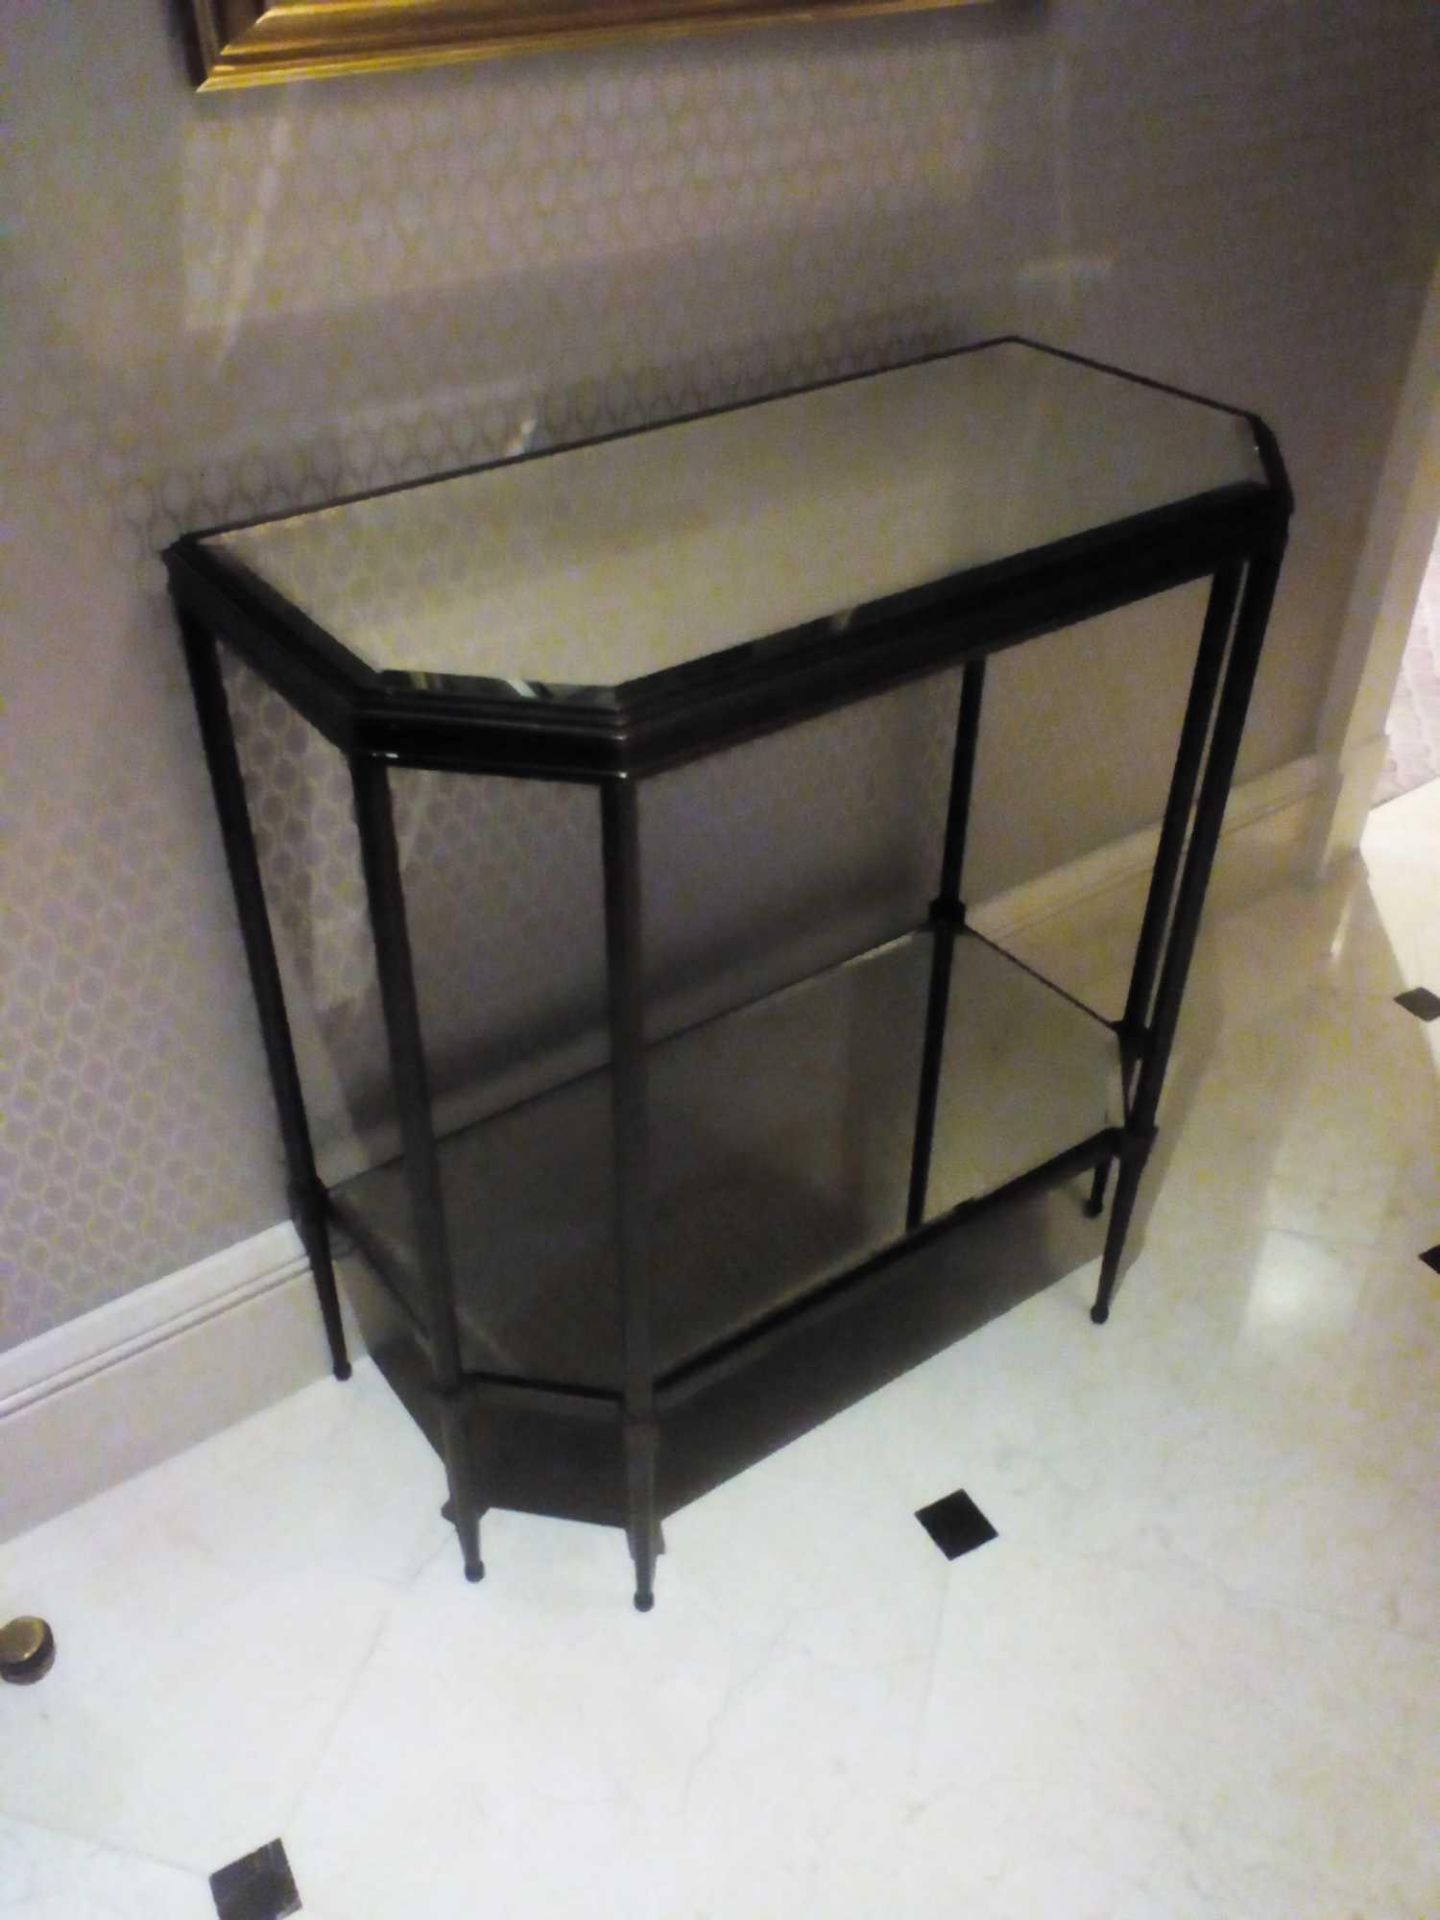 A Forged Metal Two Tier Console Table With Glass Shelves 88 x 24 x 74cm (Room 109) - Image 2 of 2